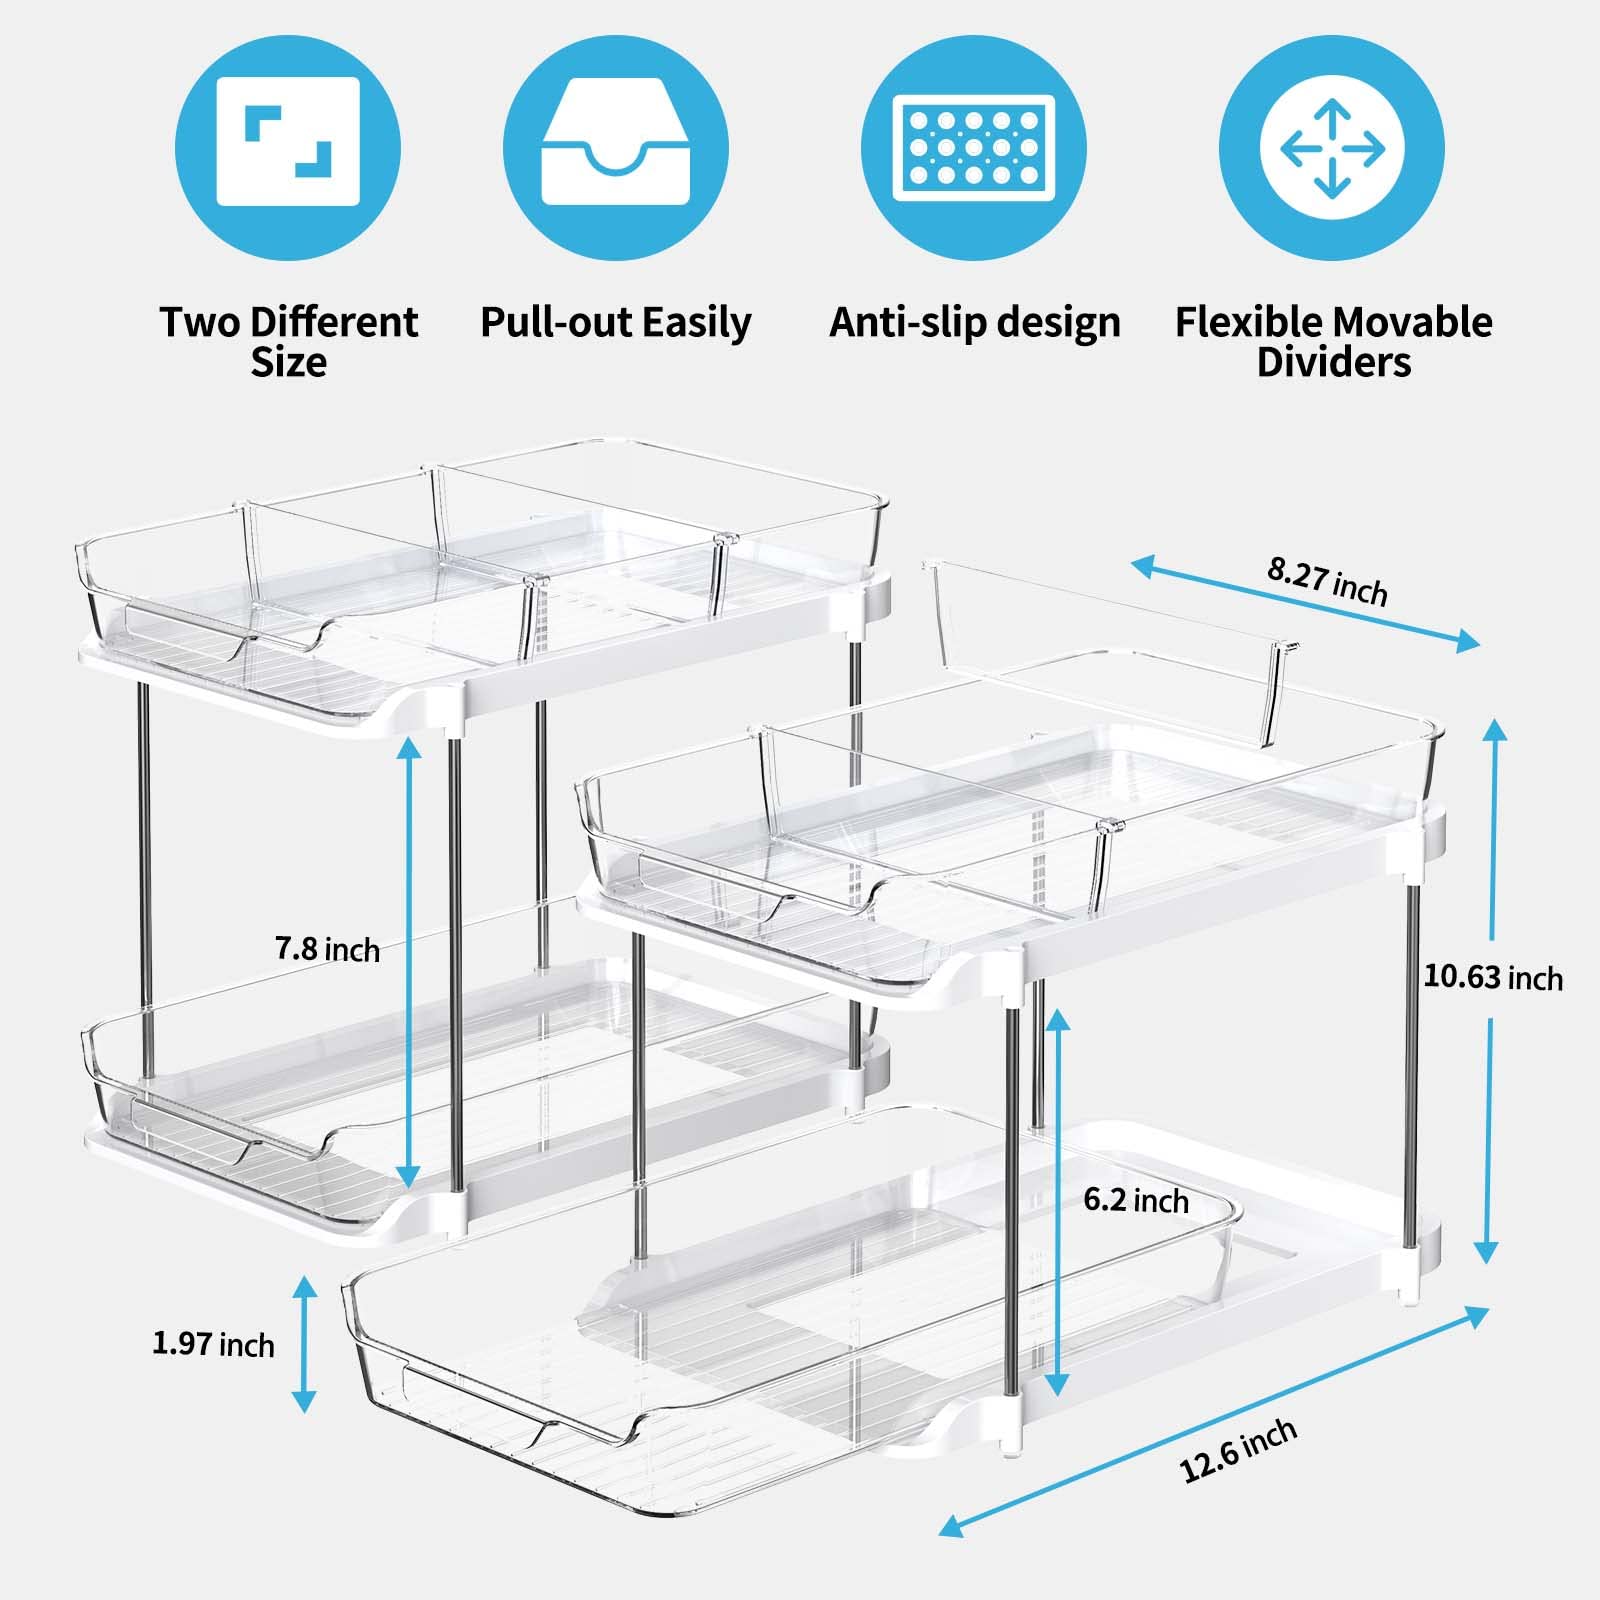 Ulruo 2 Pack Double Pull Out Under Sink Organizers, 2 Tier Multi